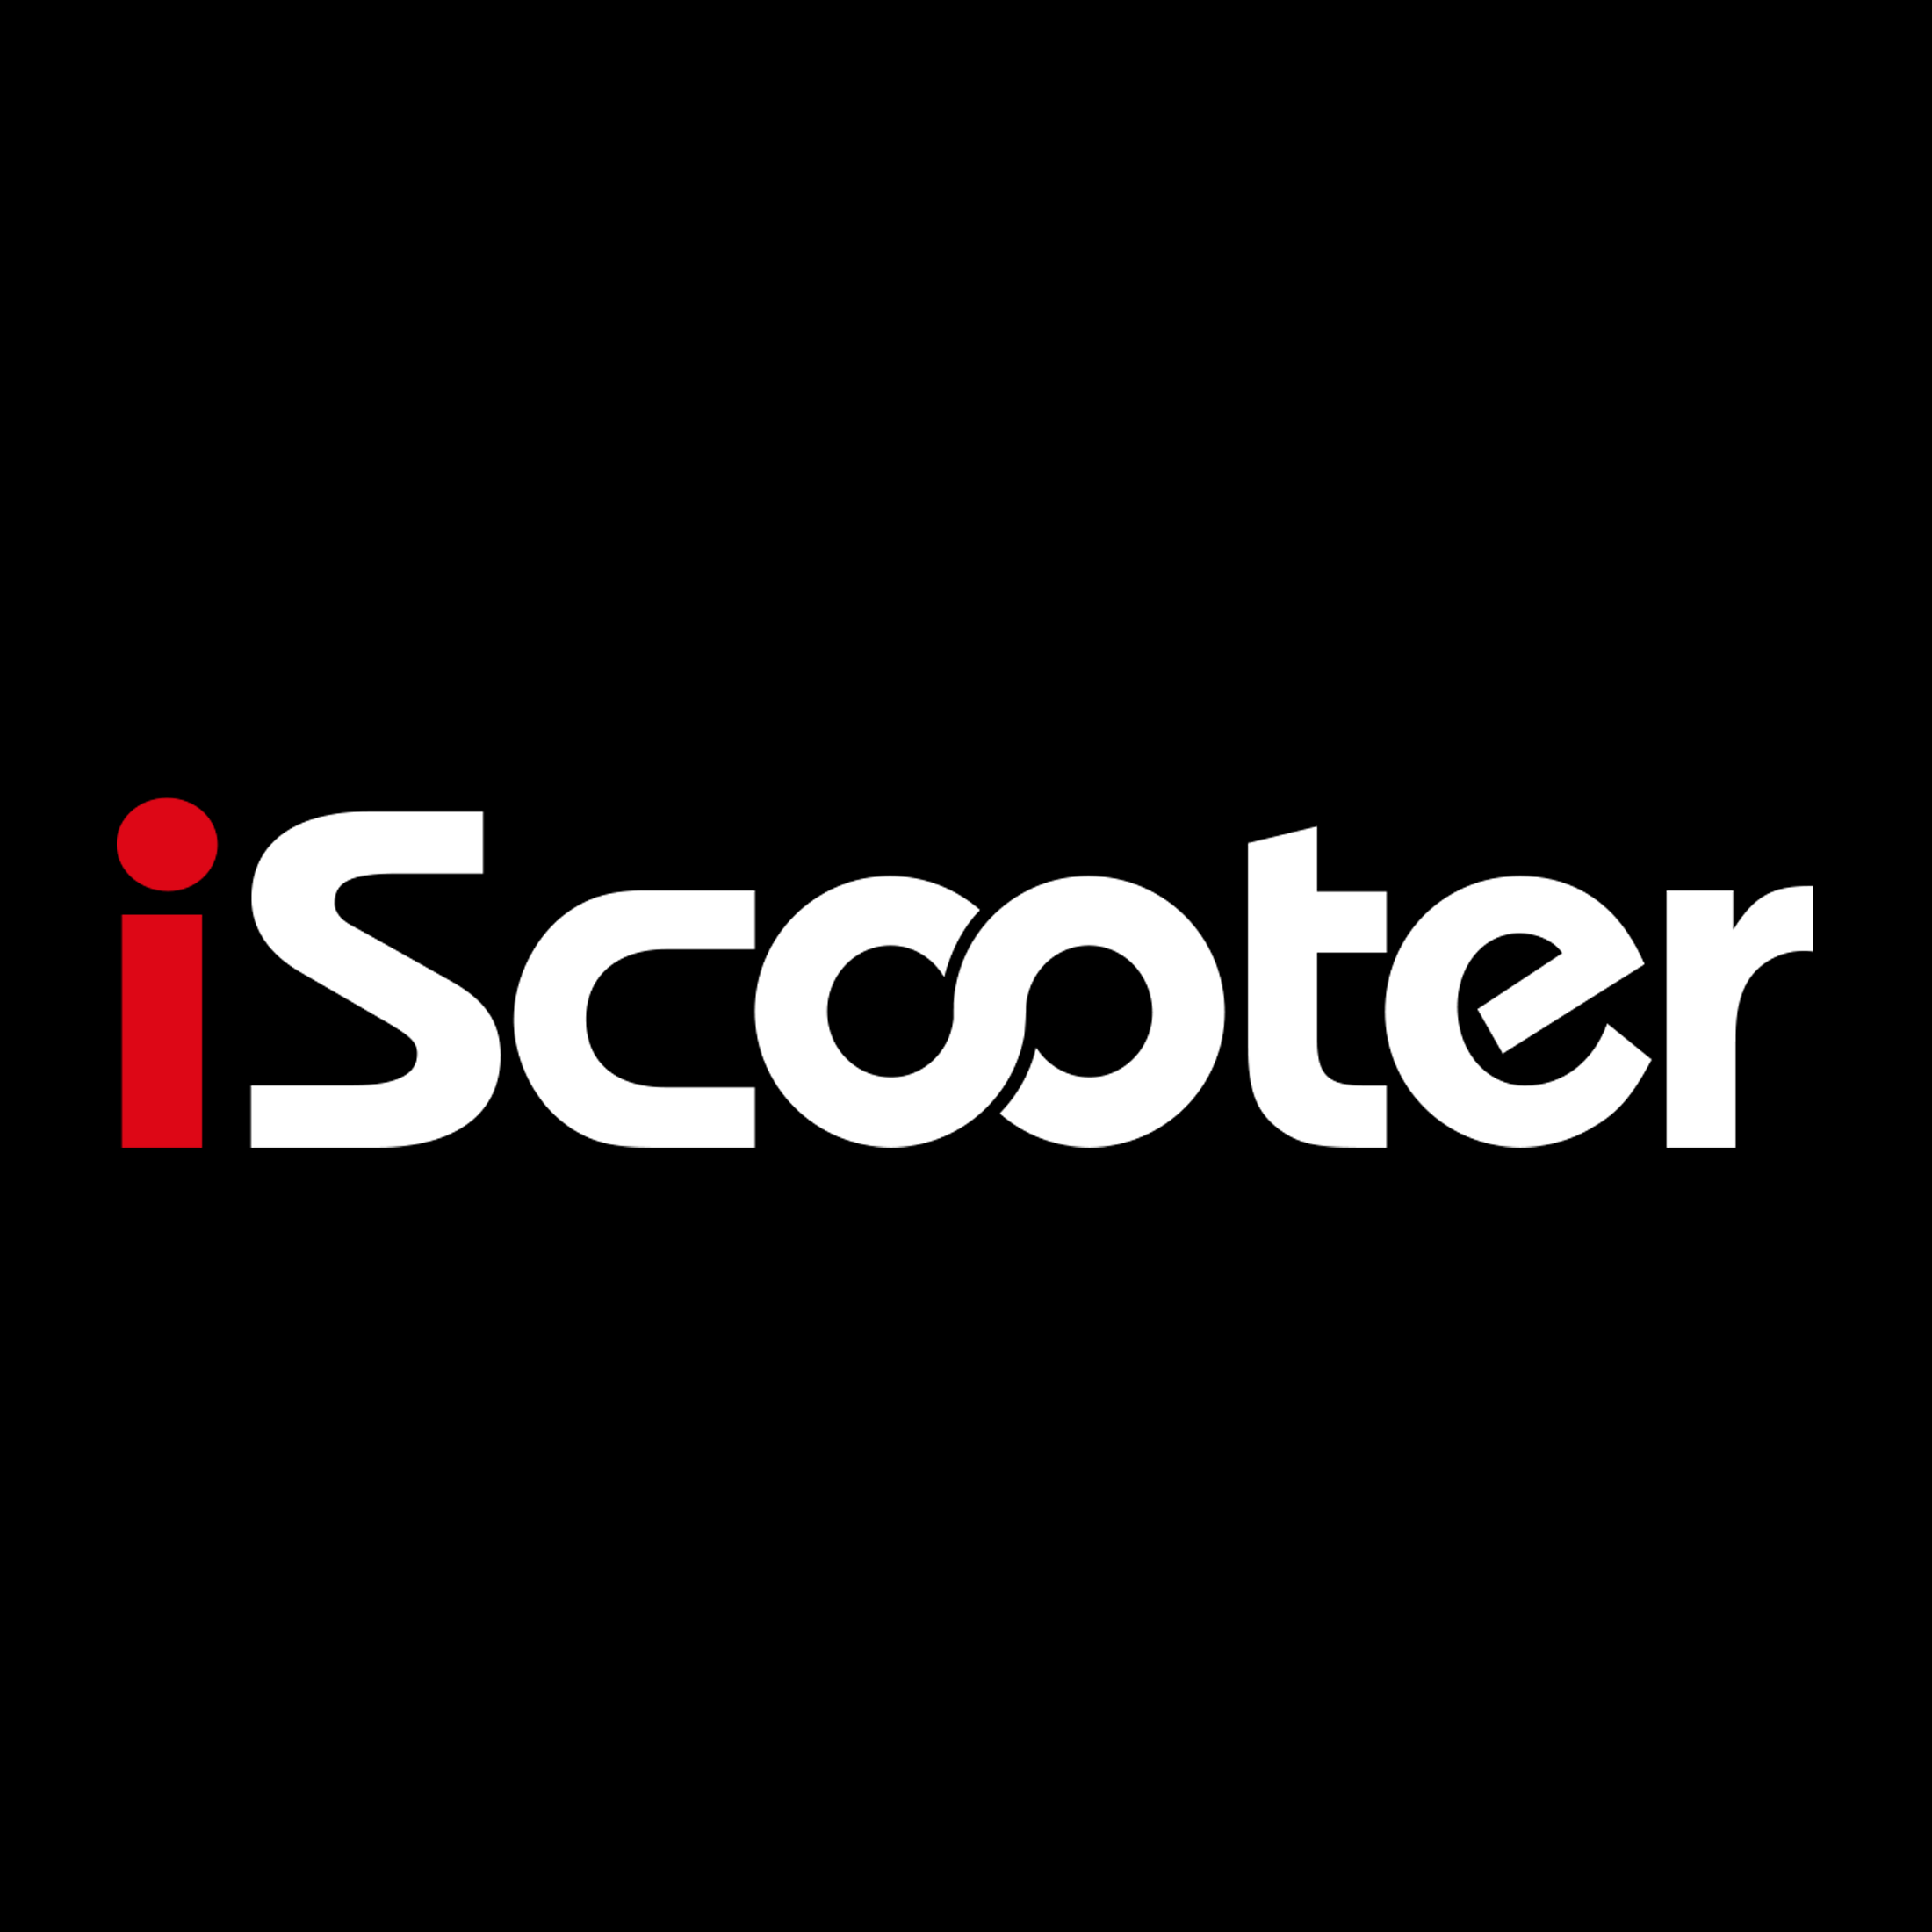 iScooter Coupons & Promo Codes